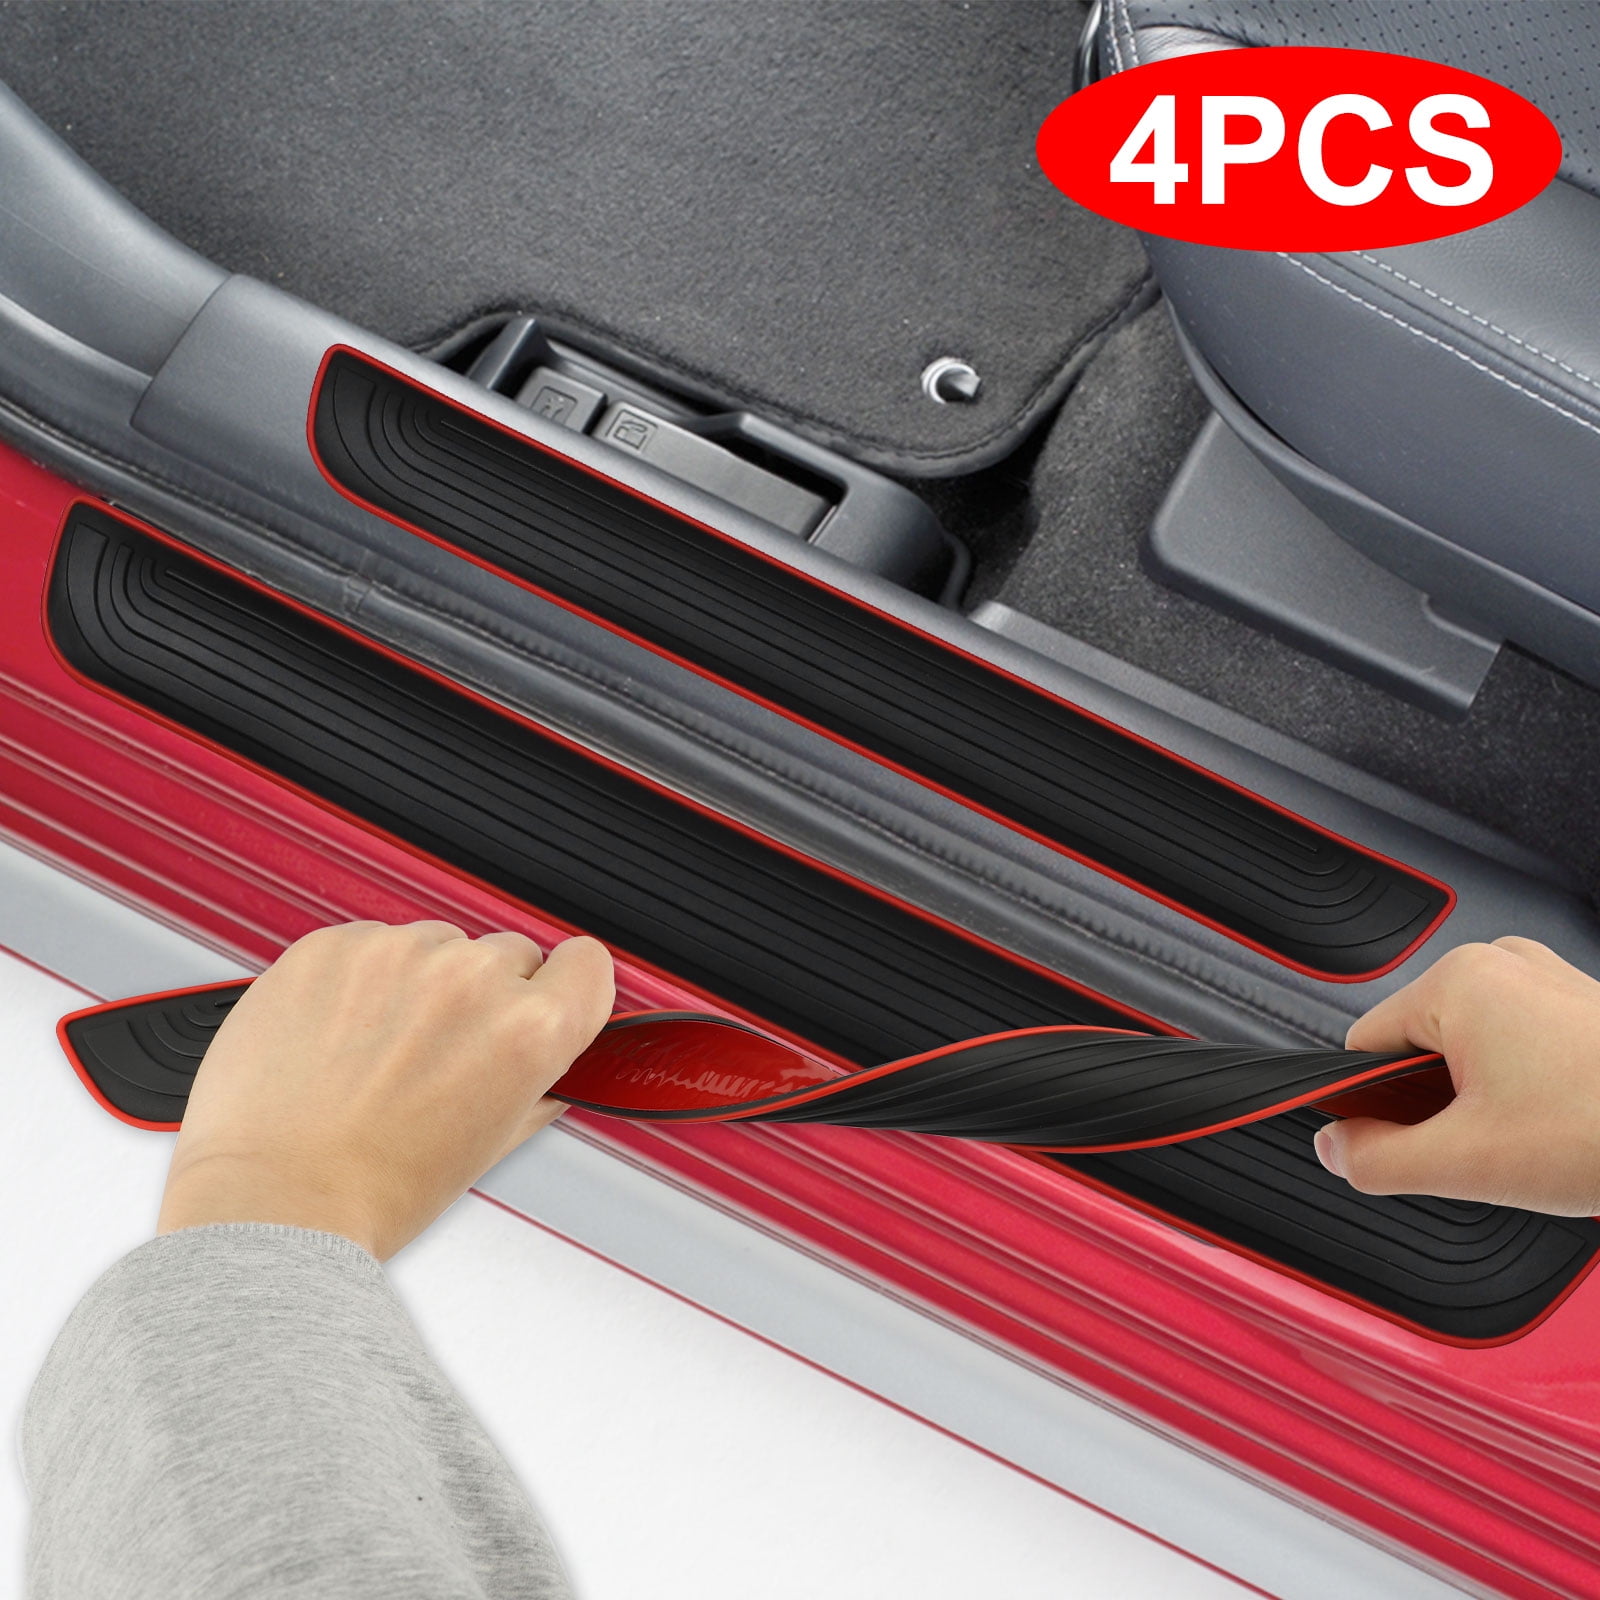 Sports Black PVC Soft Rubber Front/Rear Door Sill Scuff Plate Guard Welcome Pedal Protector Cover Bettway 4pcs/Set Car Door Sill Plate Protectors 